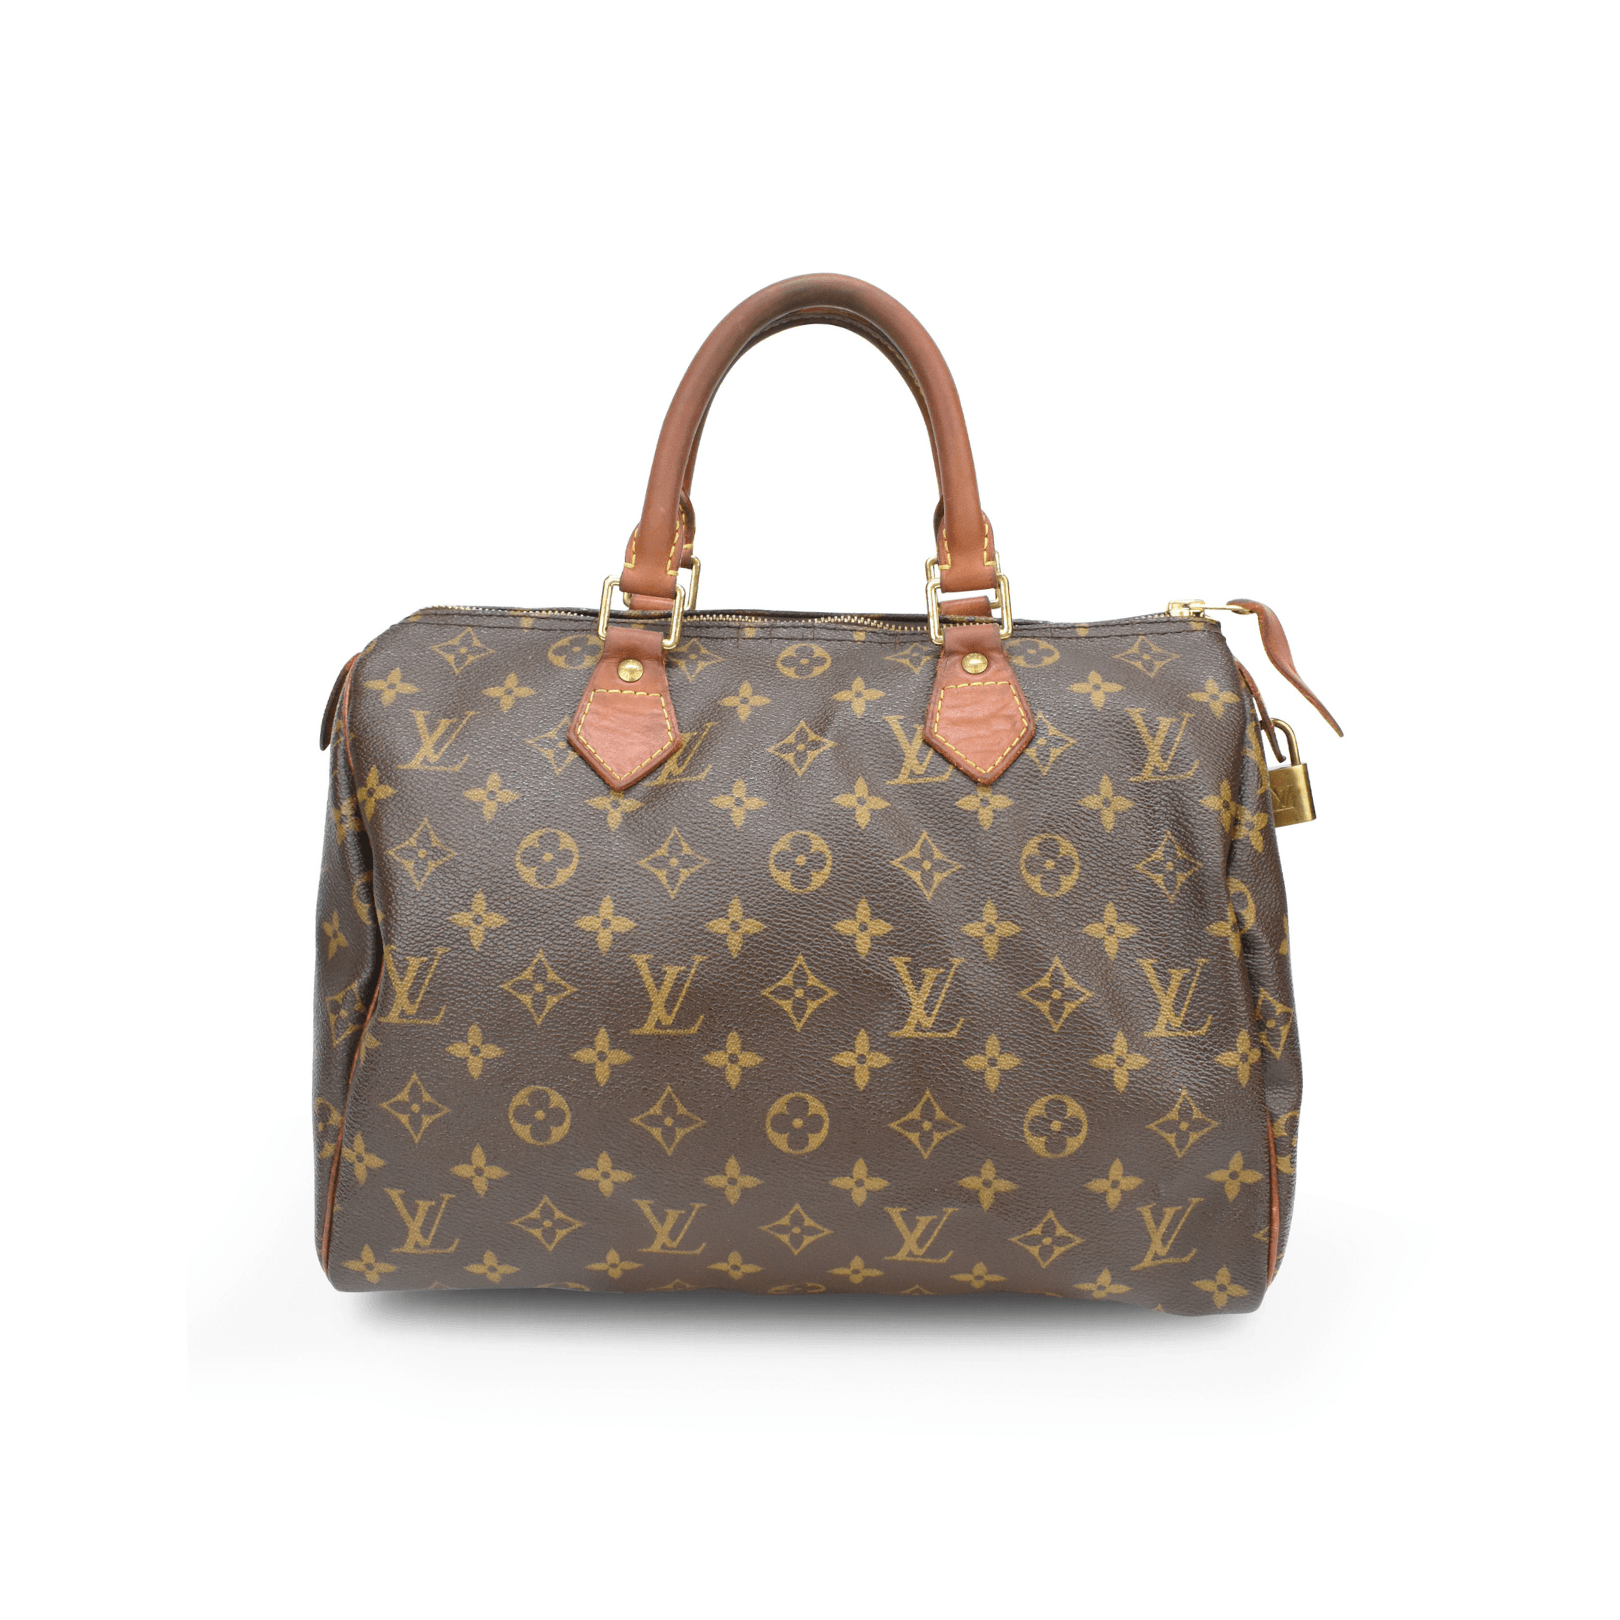 Louis Vuitton 'Speedy 30' Bag - Fashionably Yours